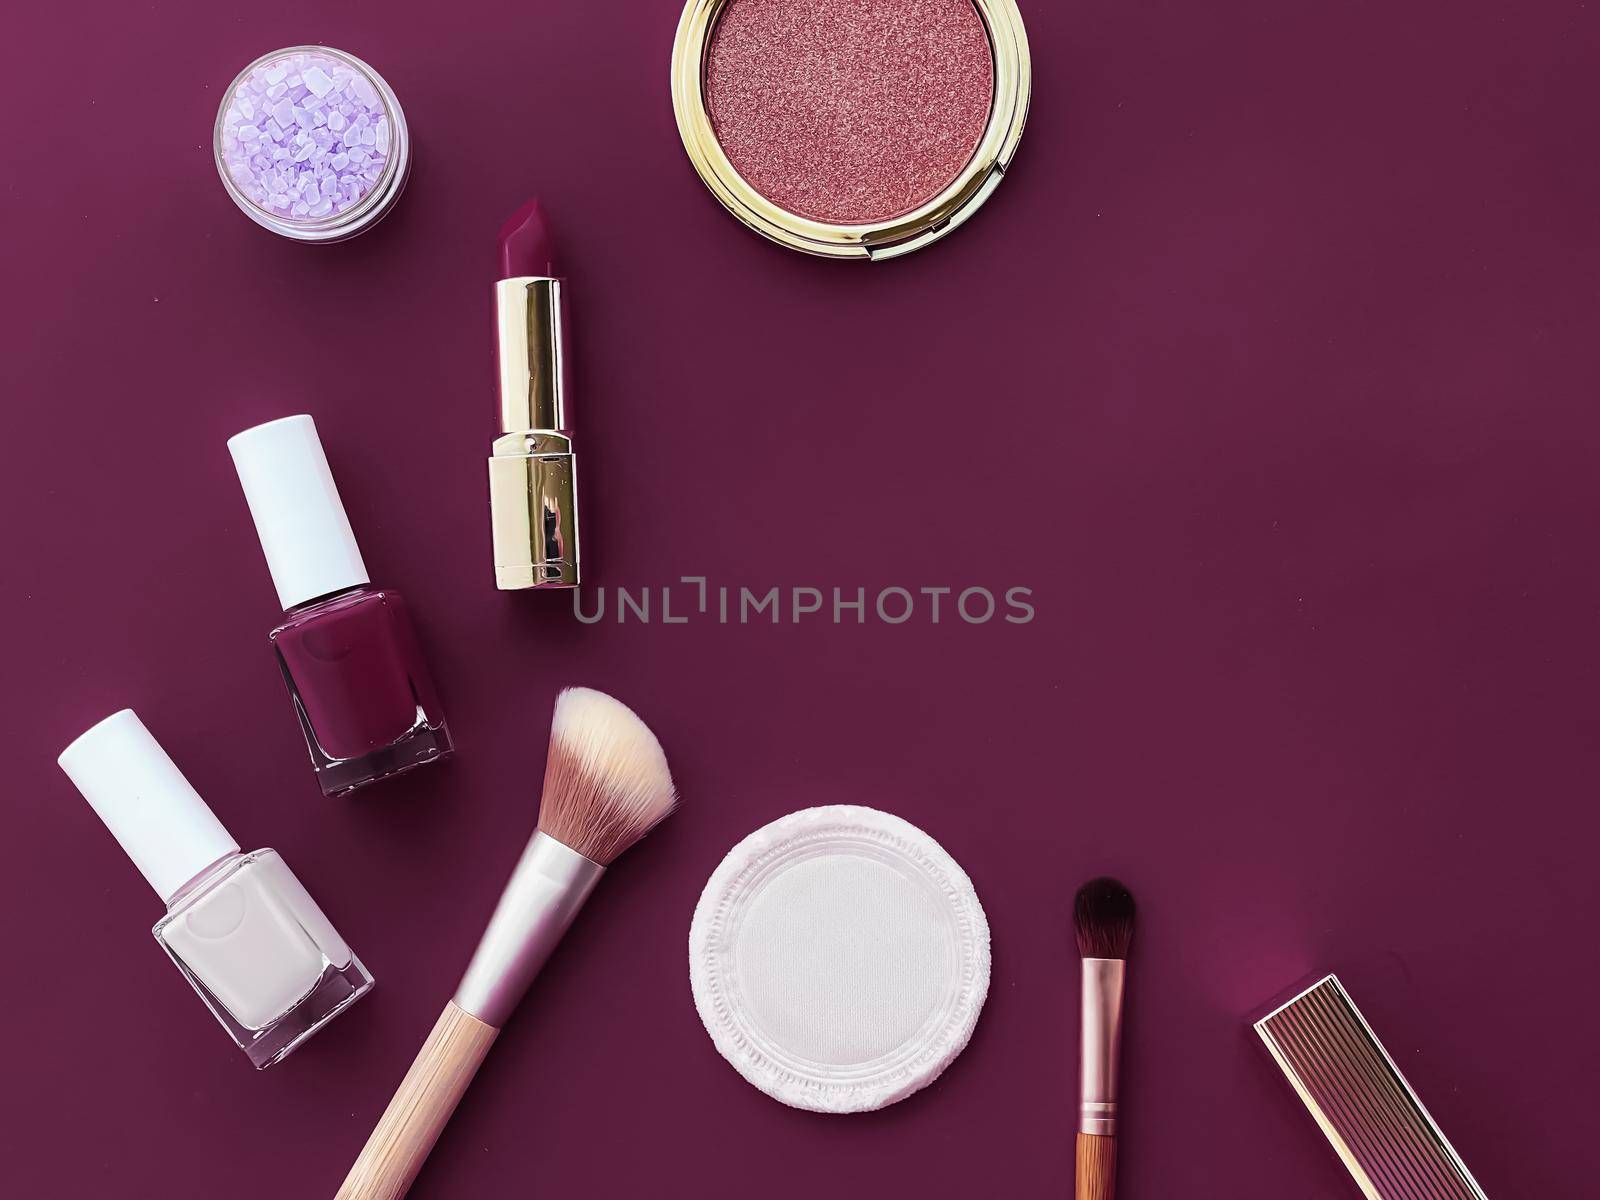 Beauty, make-up and cosmetics flatlay design with copyspace, cosmetic products and makeup tools on purple background, girly and feminine style concept